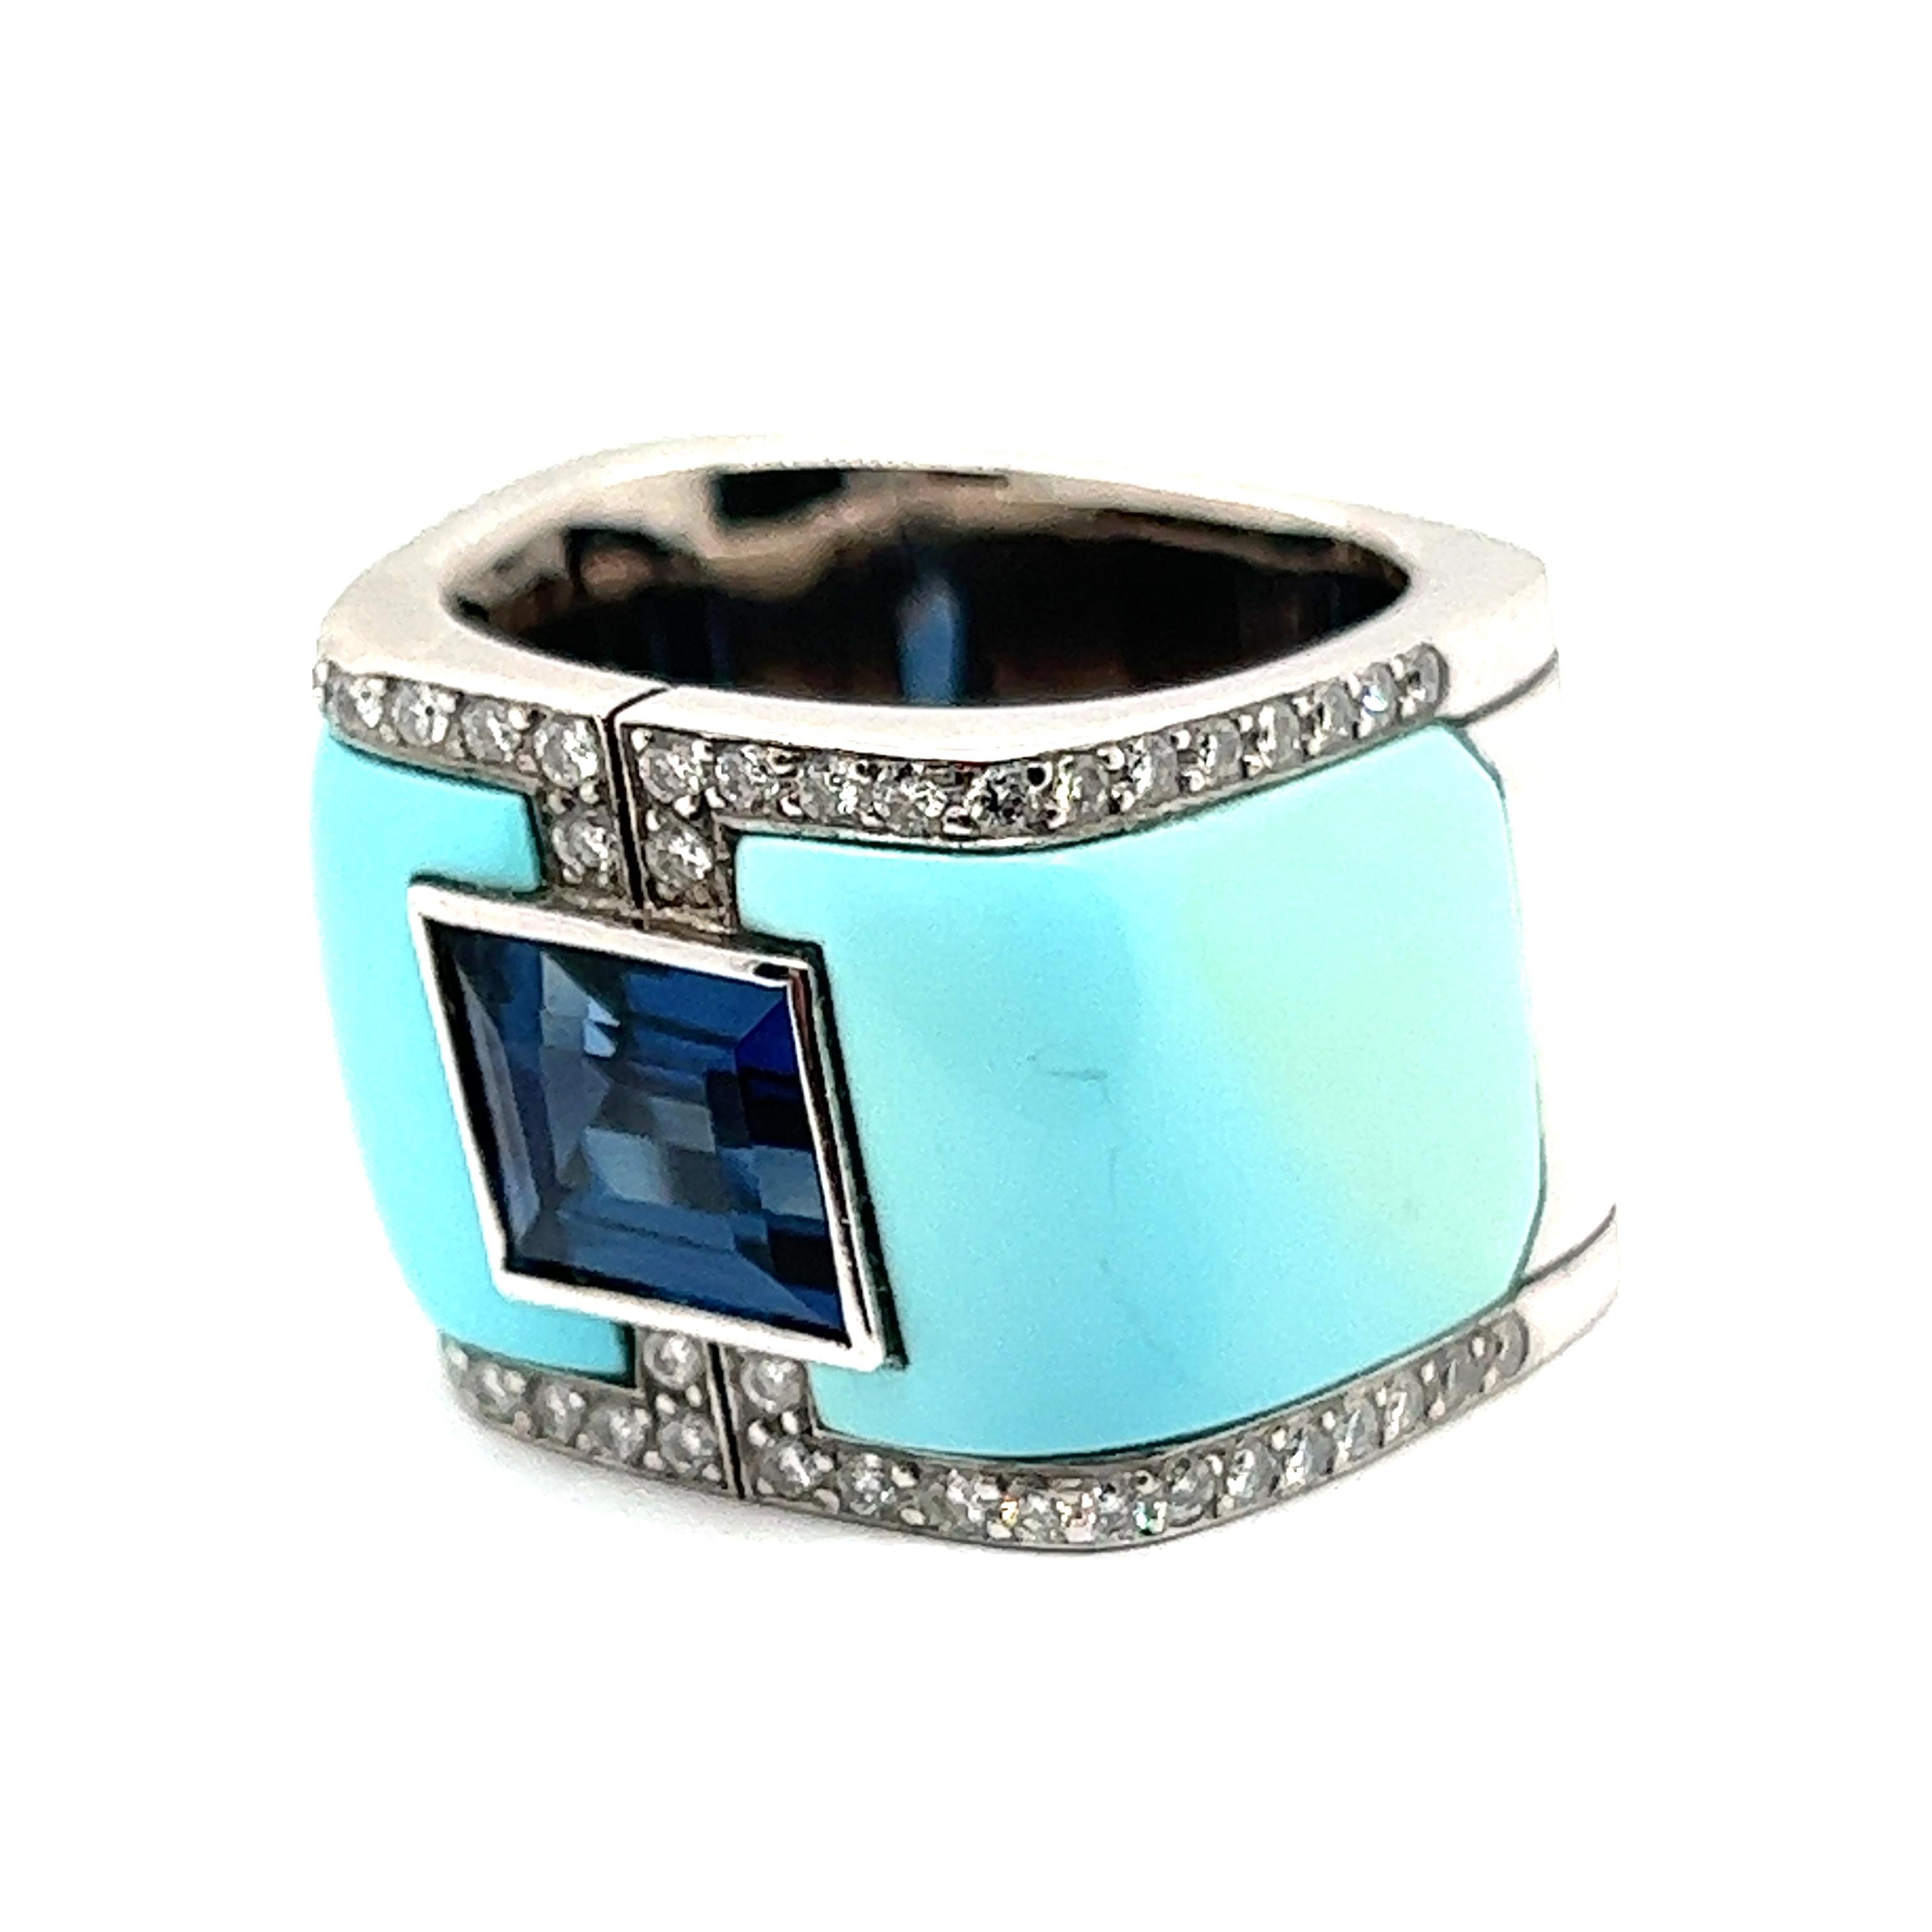 This avant-garde ring from the Swiss jeweler Binder highlights unparalleled artistry and creative design.

Created from 18 Karat white gold, the band serves as a canvas for a captivating 2.86 carat sapphire flanked by two turquoise gems. A halo of